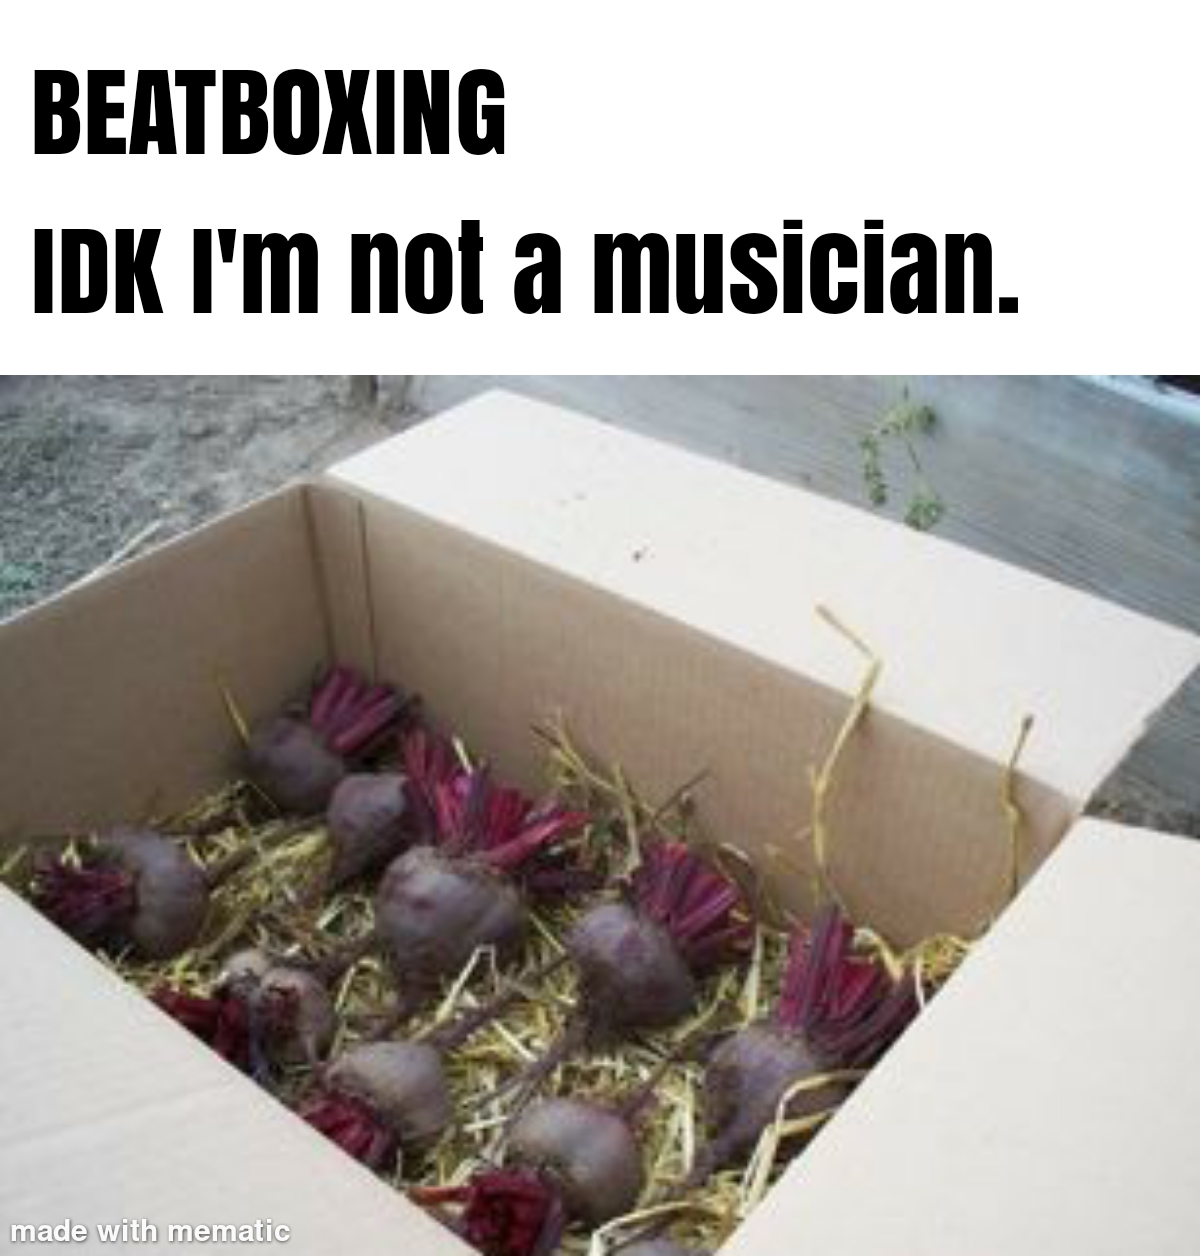 produce - Beatboxing Idk I'm not a musician. made with mematic